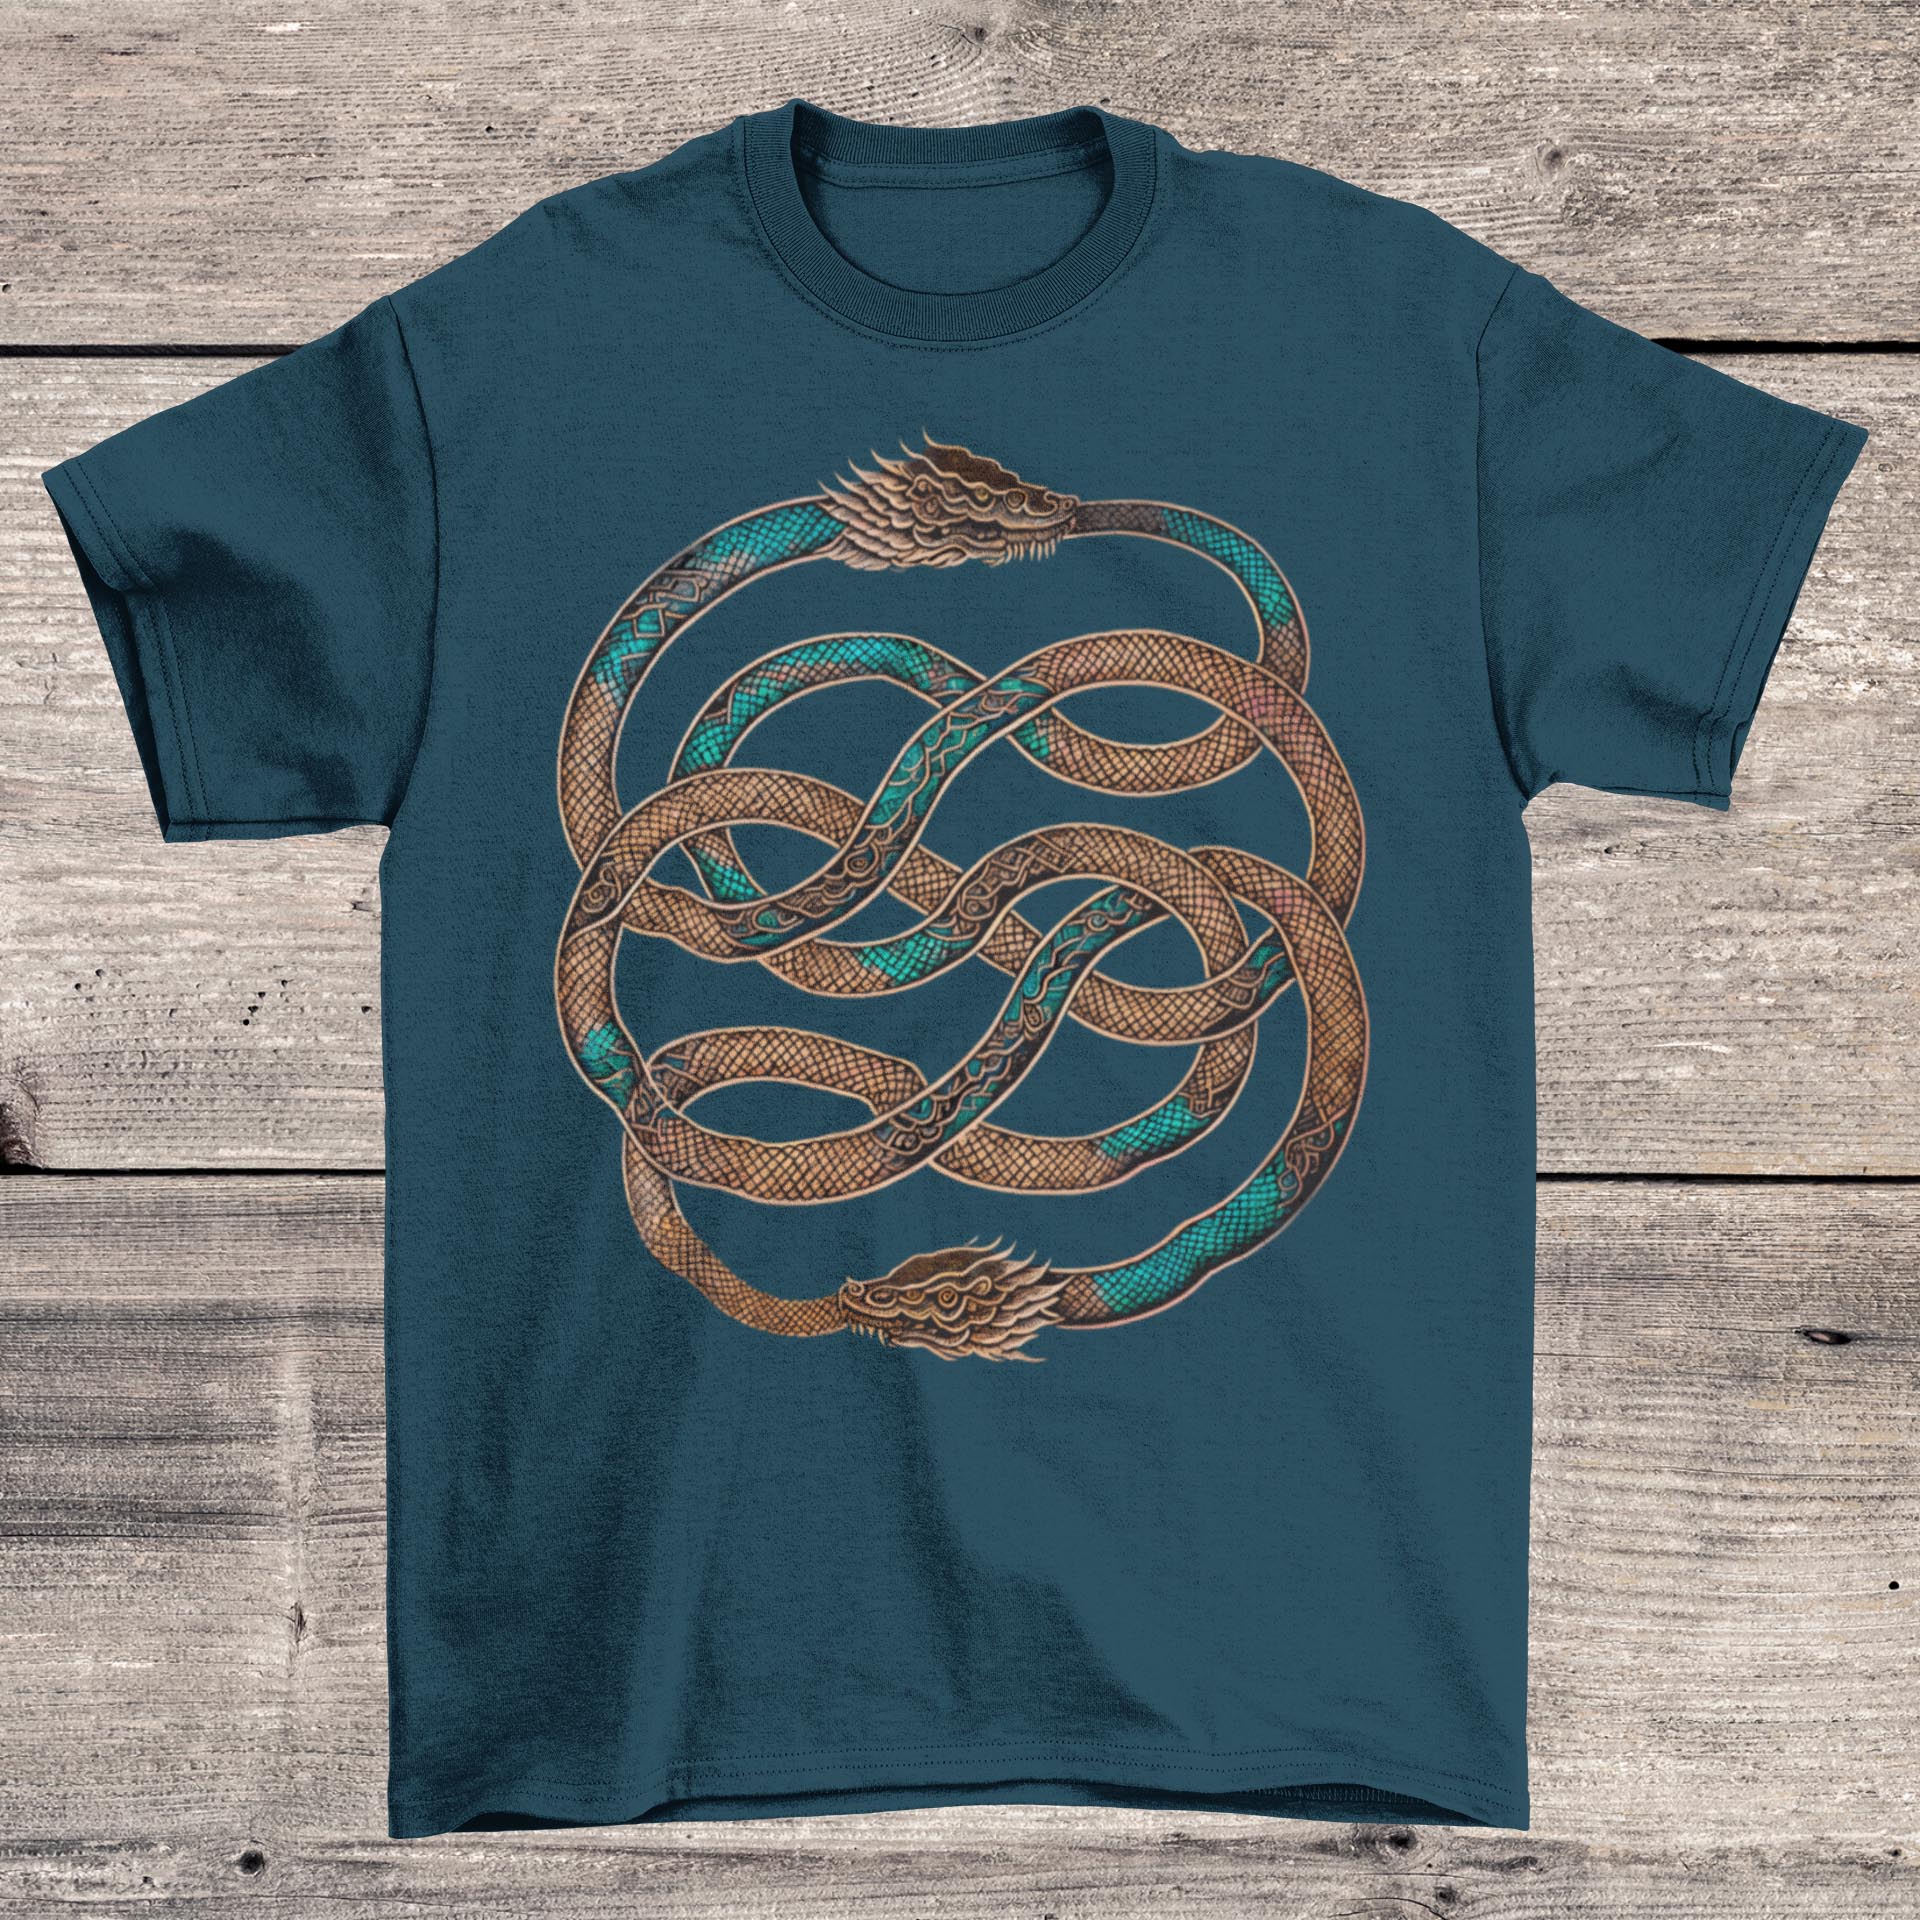 T-Shirts S / Midnight The Ouroboros: Medieval Mystical Serpent, Dragon | Esoteric Alchemy | Egyptian Circle of Life Graphic Art T-Shirt